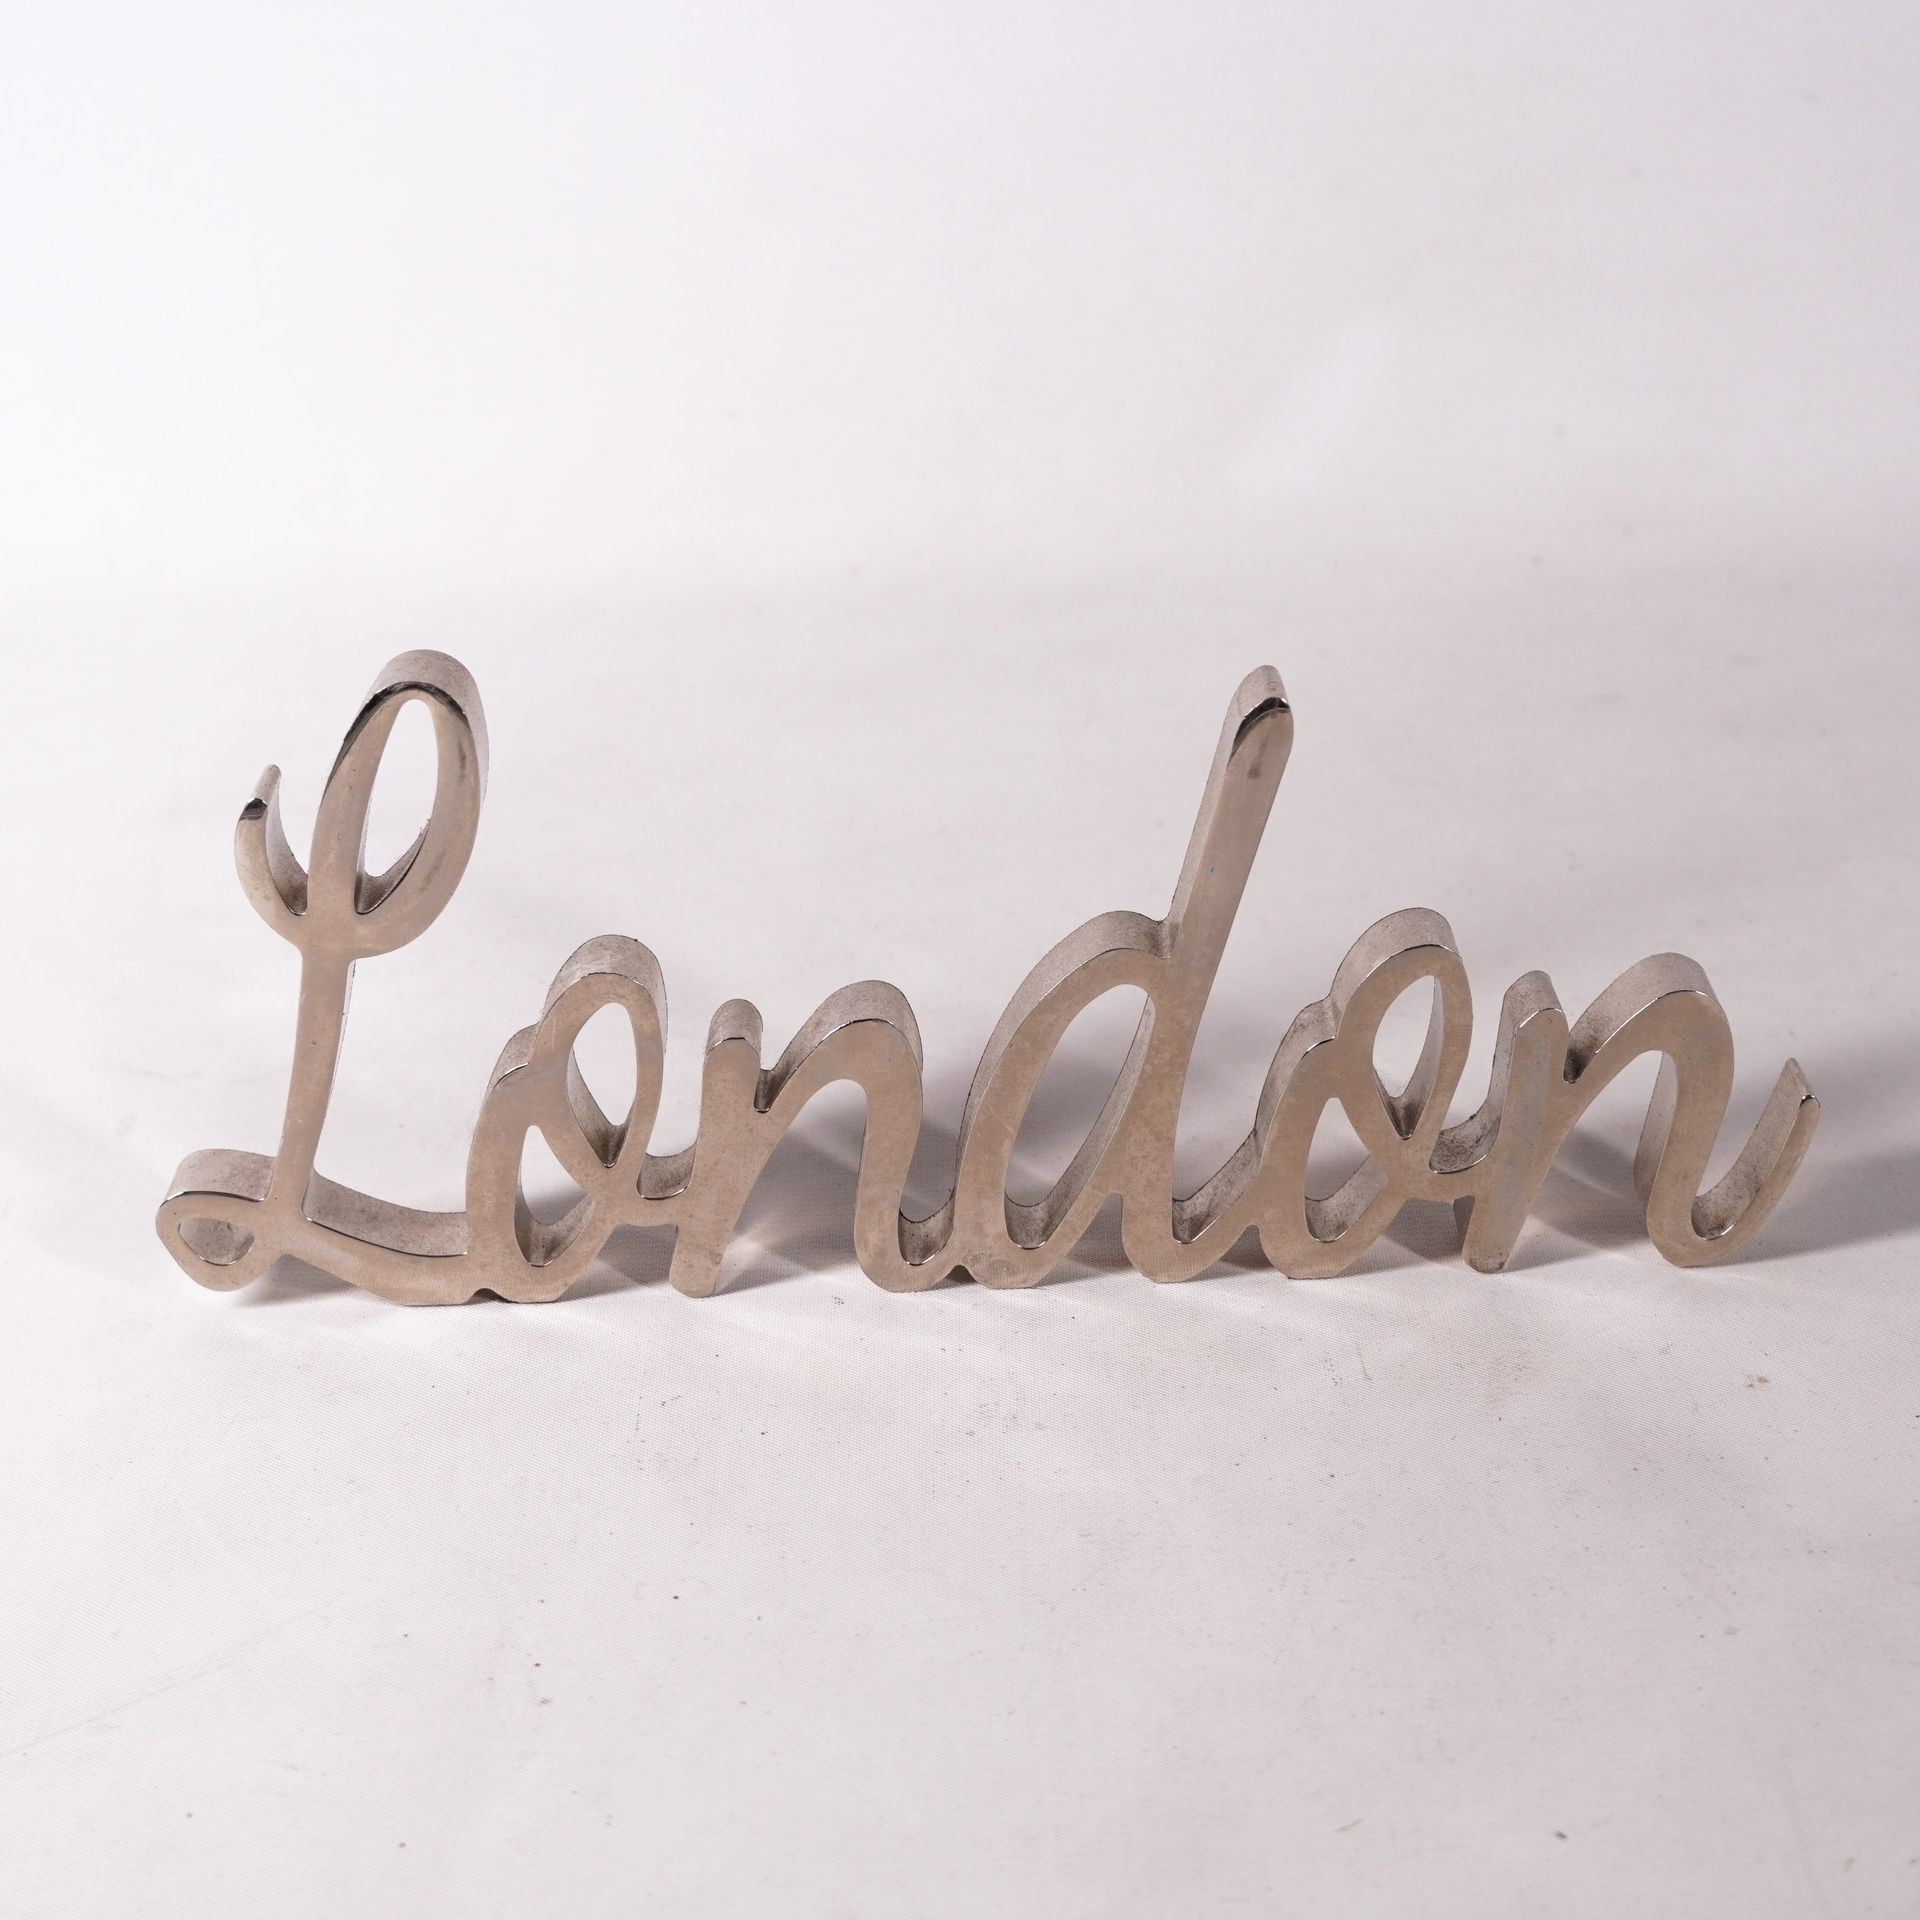 9" Silver Metal London Sign Home Decor Art Decoration Paper Weight